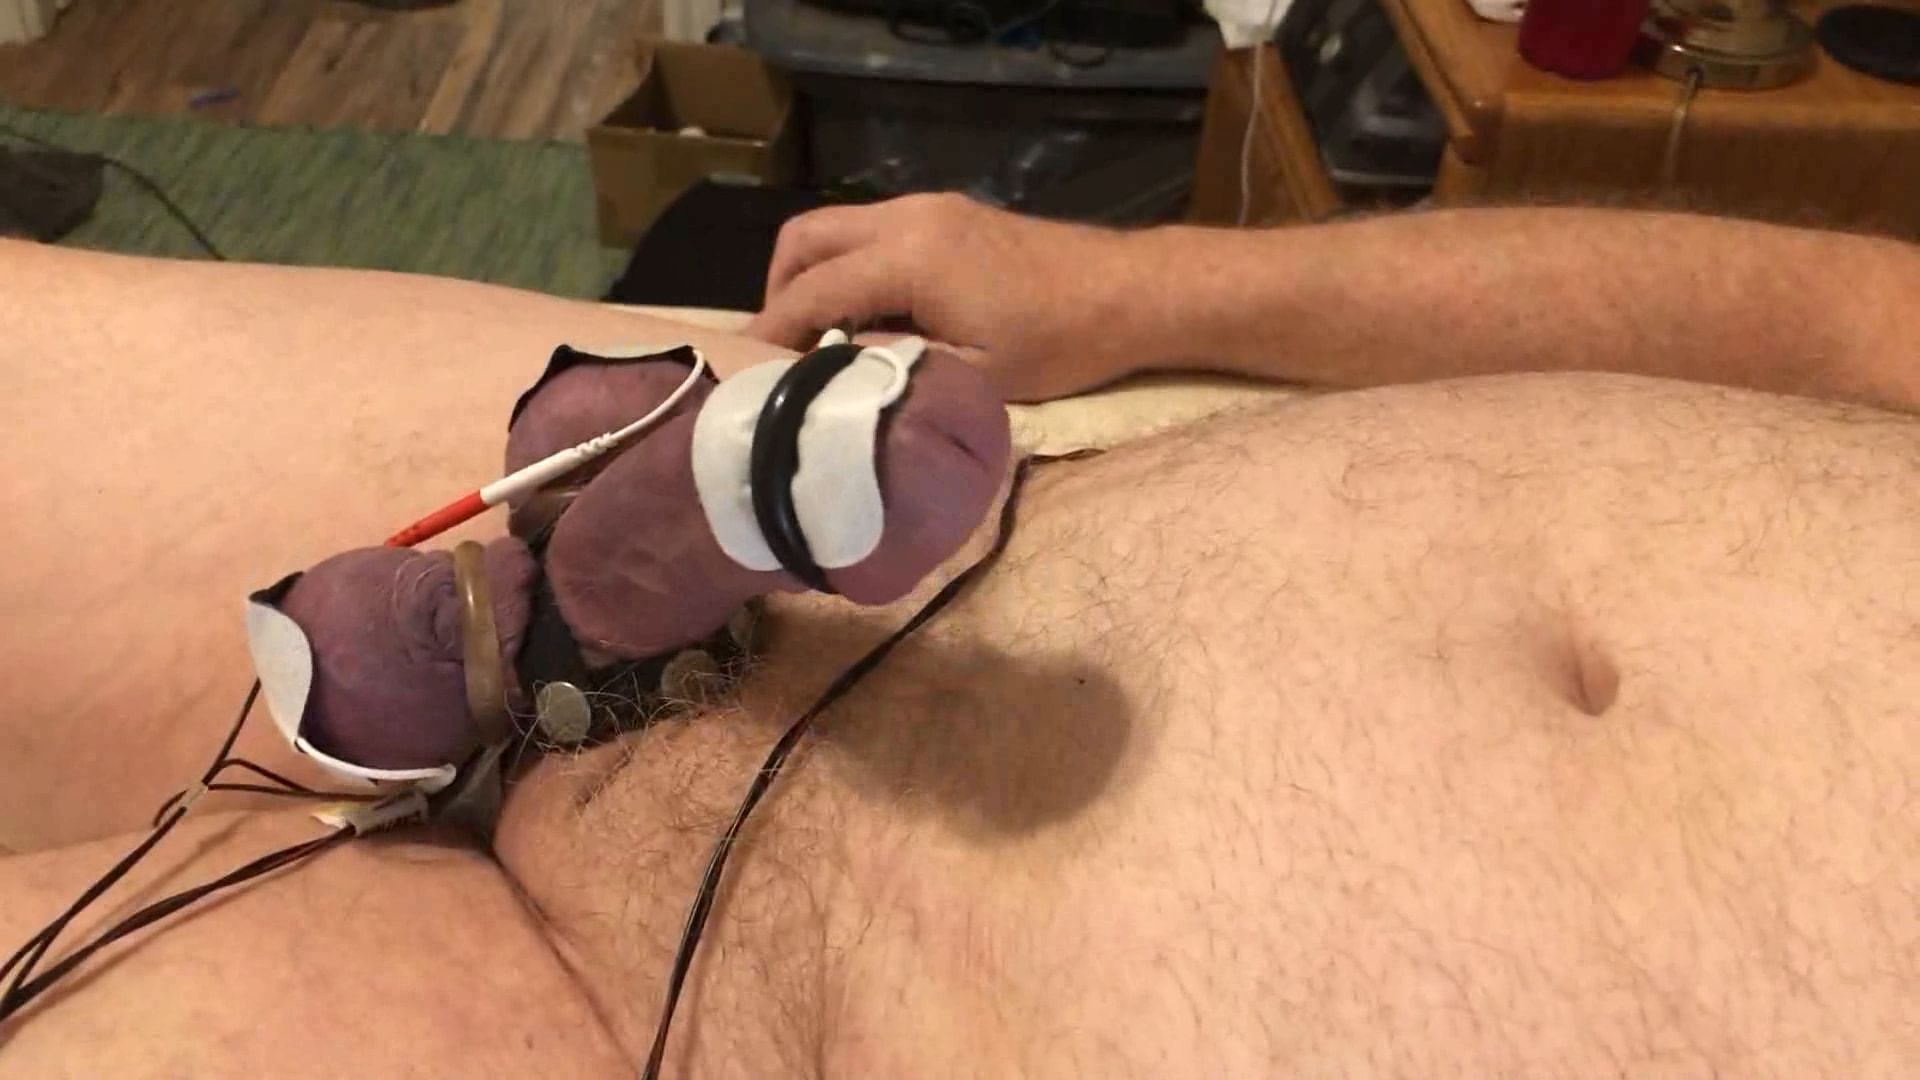 Cock twitches with estim pulse and precum flows as I slap an #21